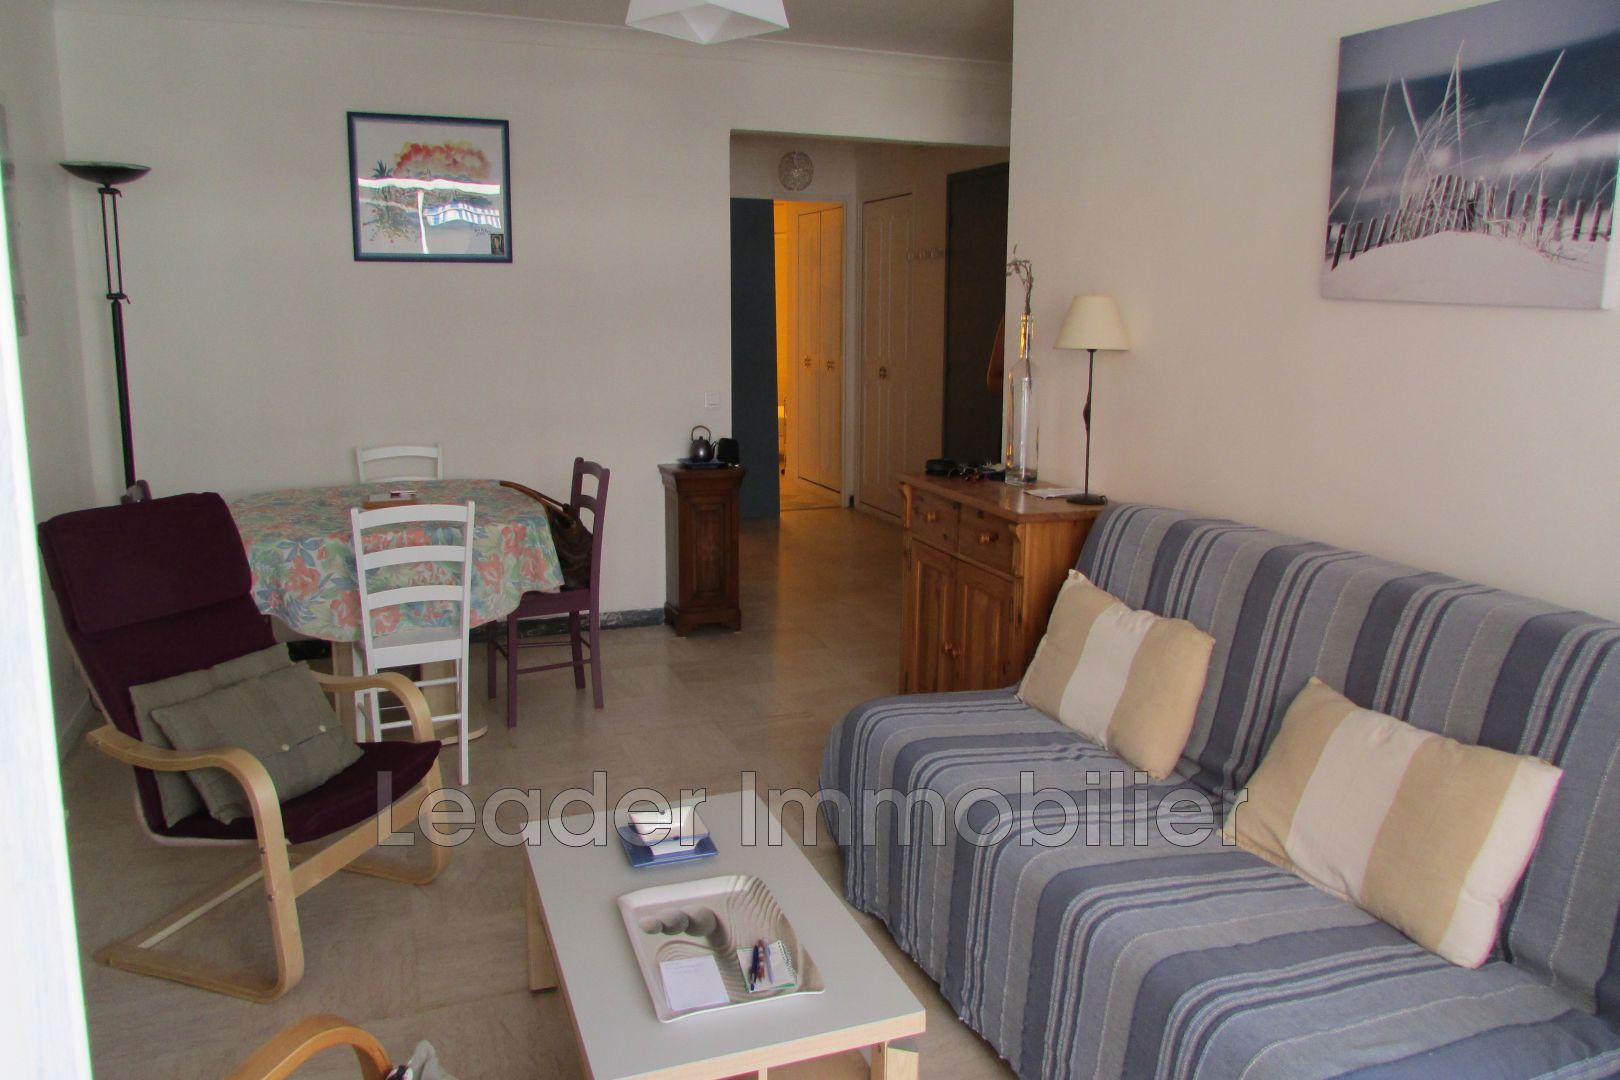 Appartement 3 pièces - 65m² - ANTIBES